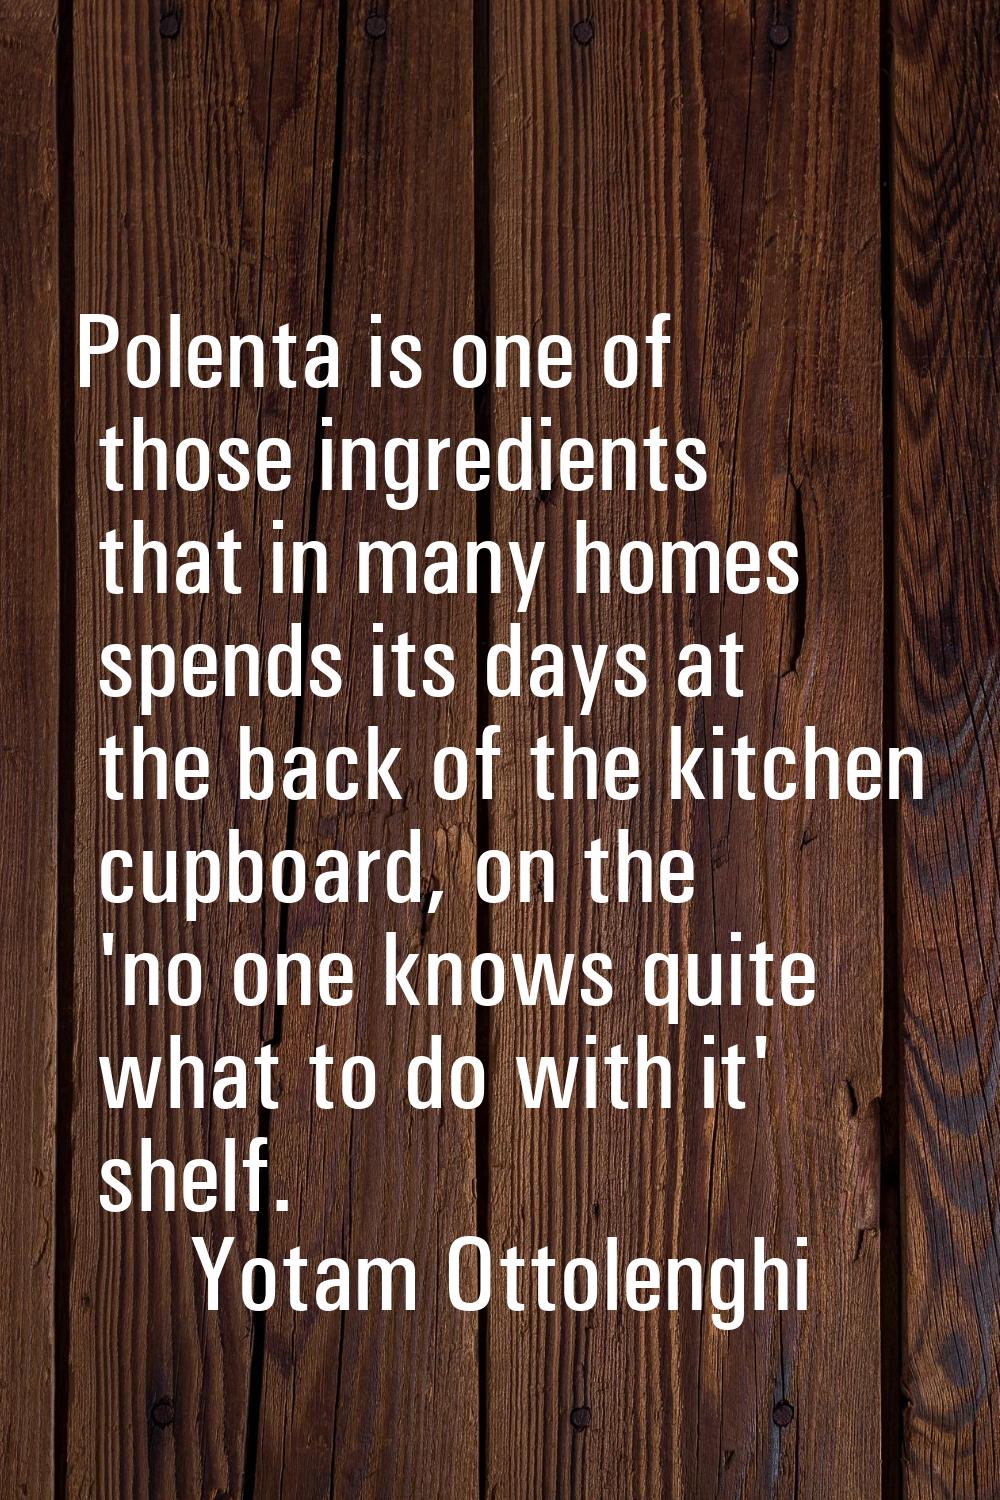 Polenta is one of those ingredients that in many homes spends its days at the back of the kitchen c